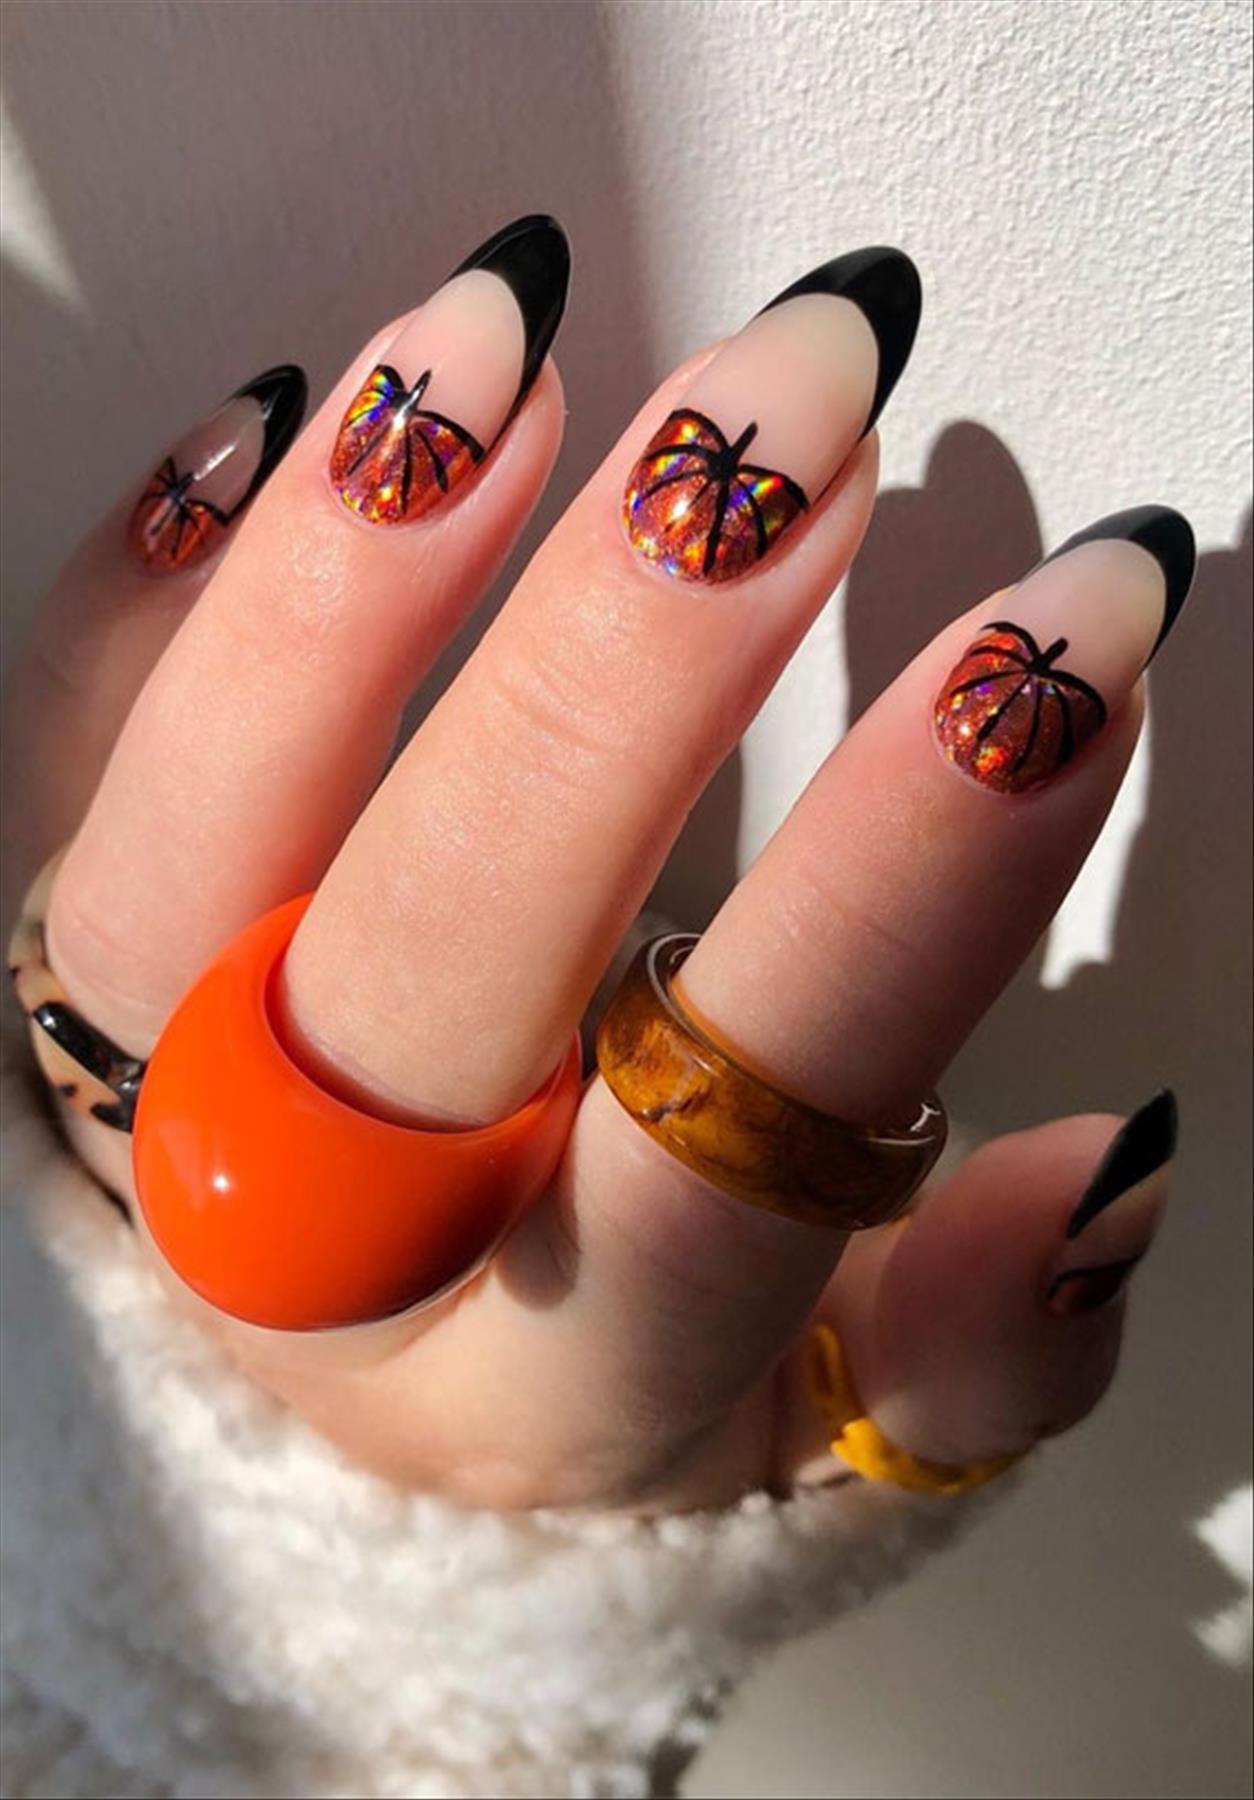 Best short Halloween nails aesthetic perfect for 2022